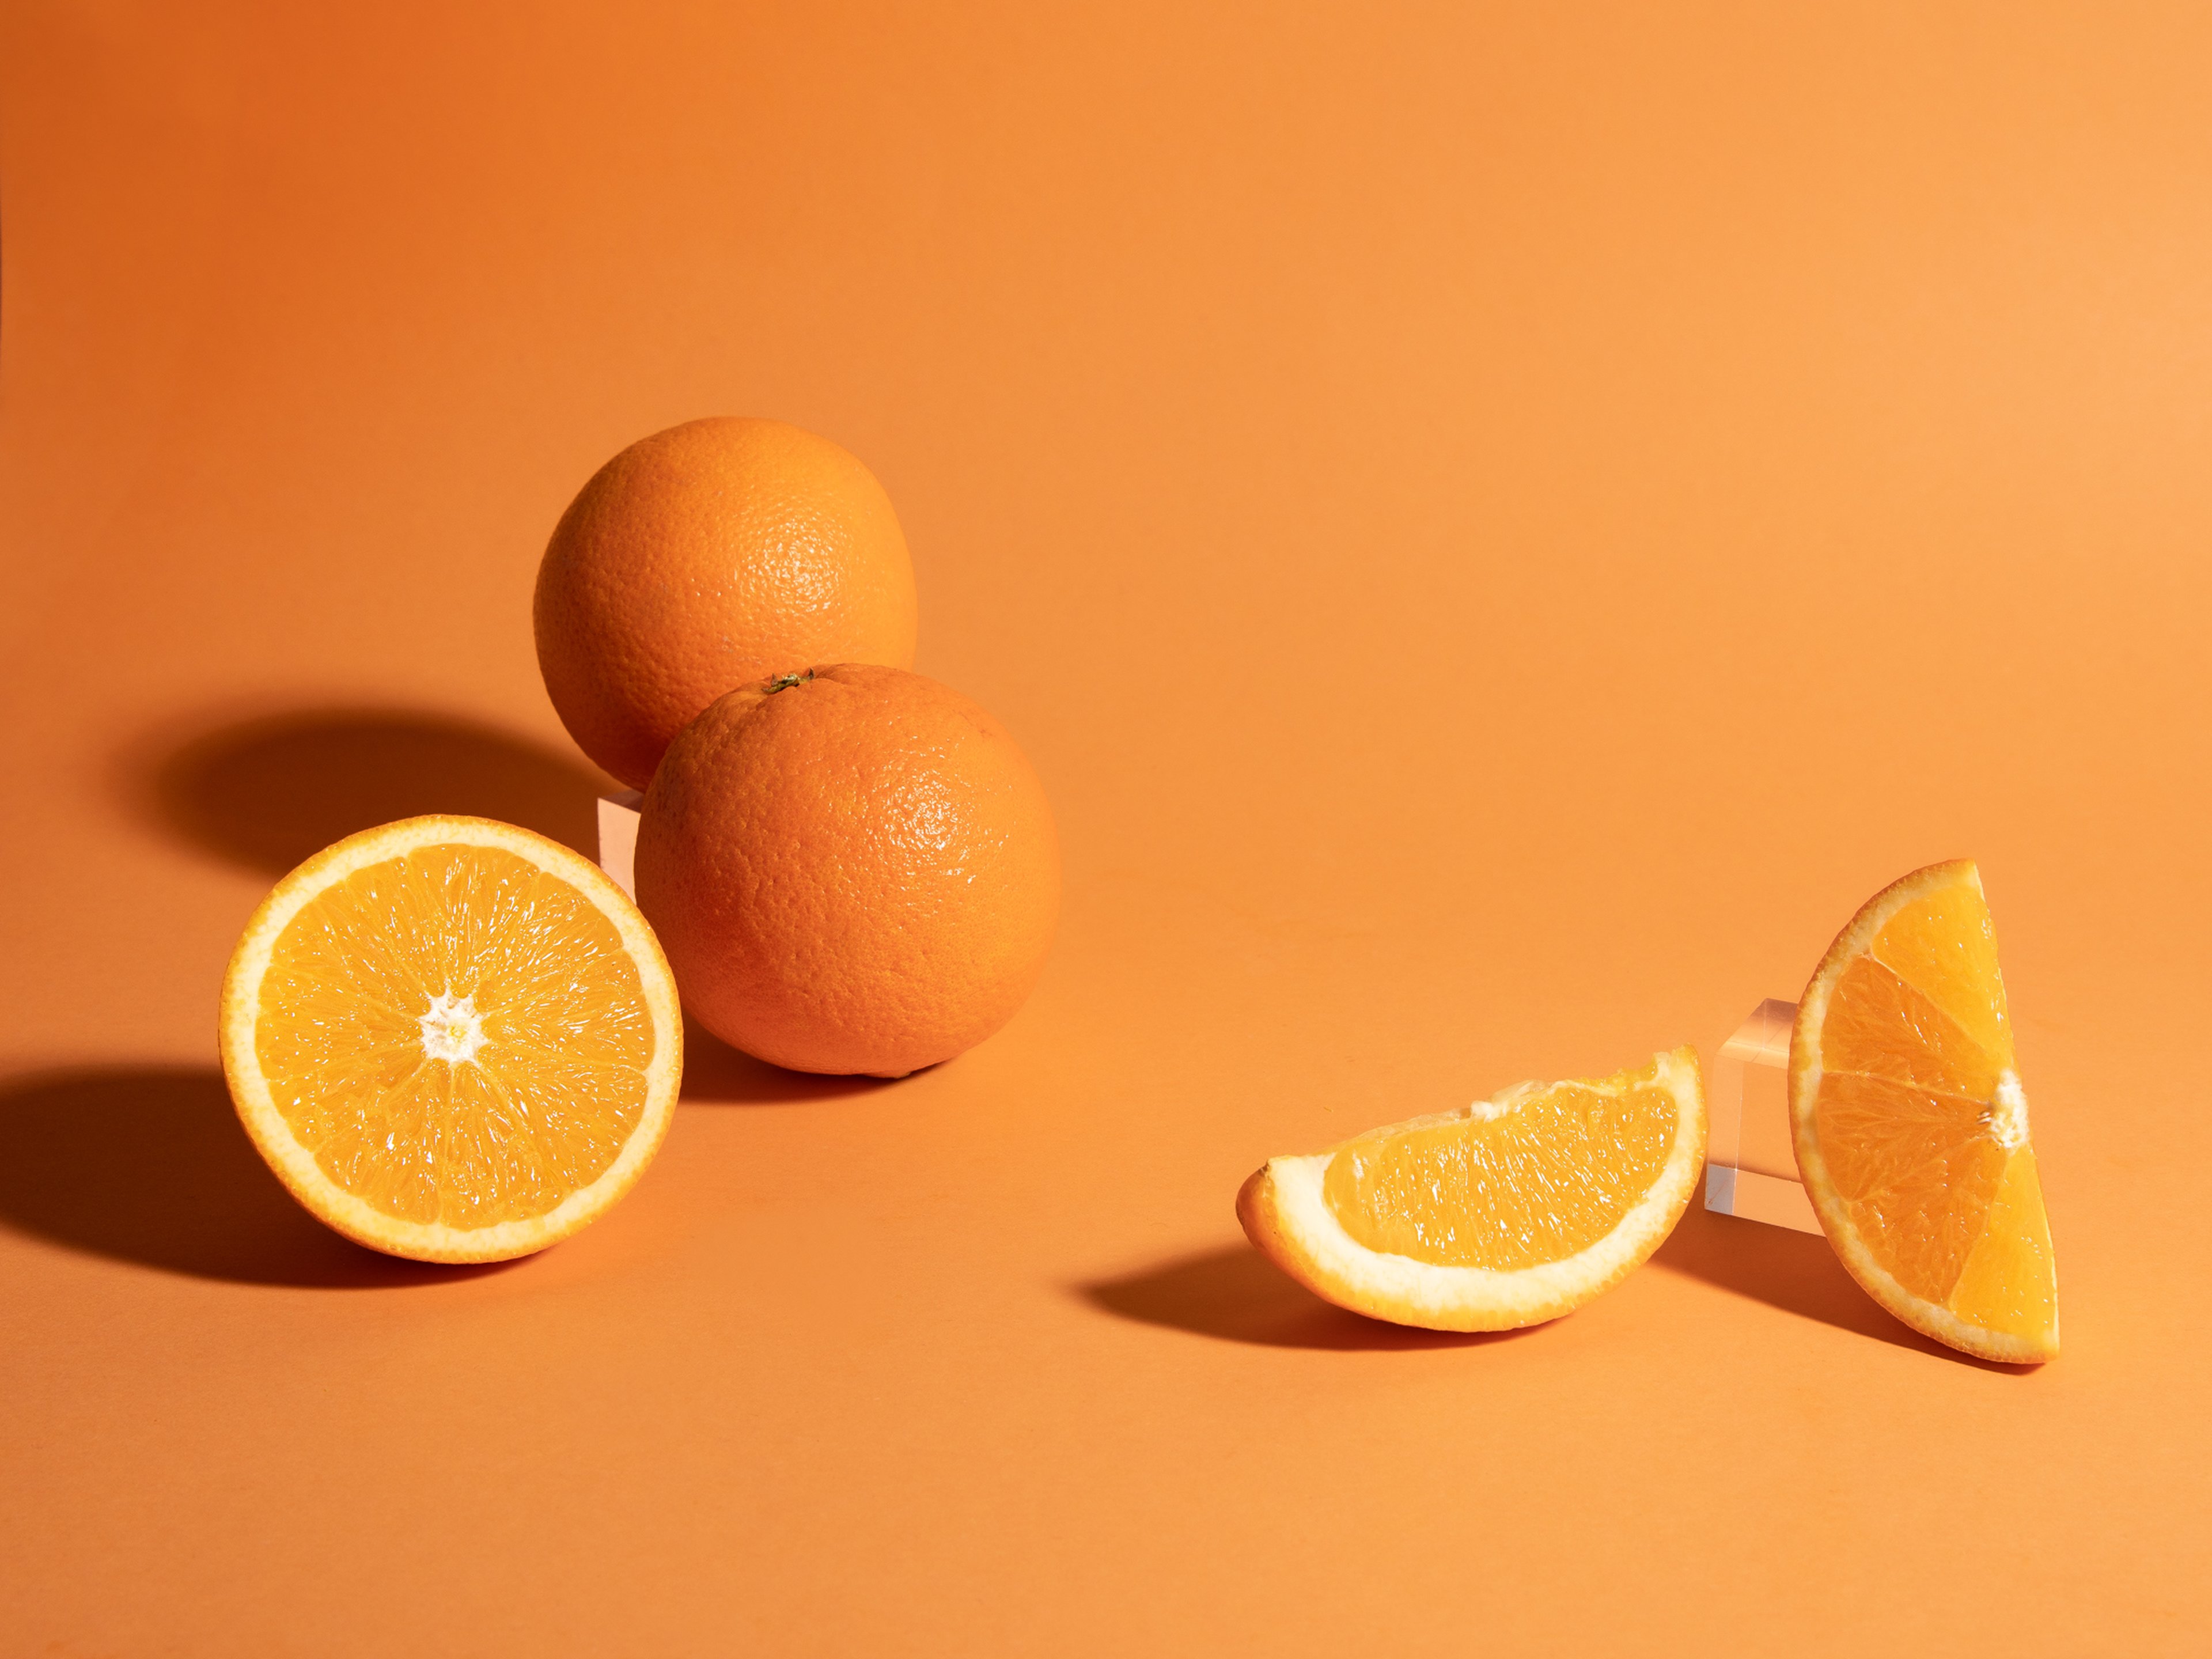 Everything You Need to Know About Preparing and Storing In Season Oranges